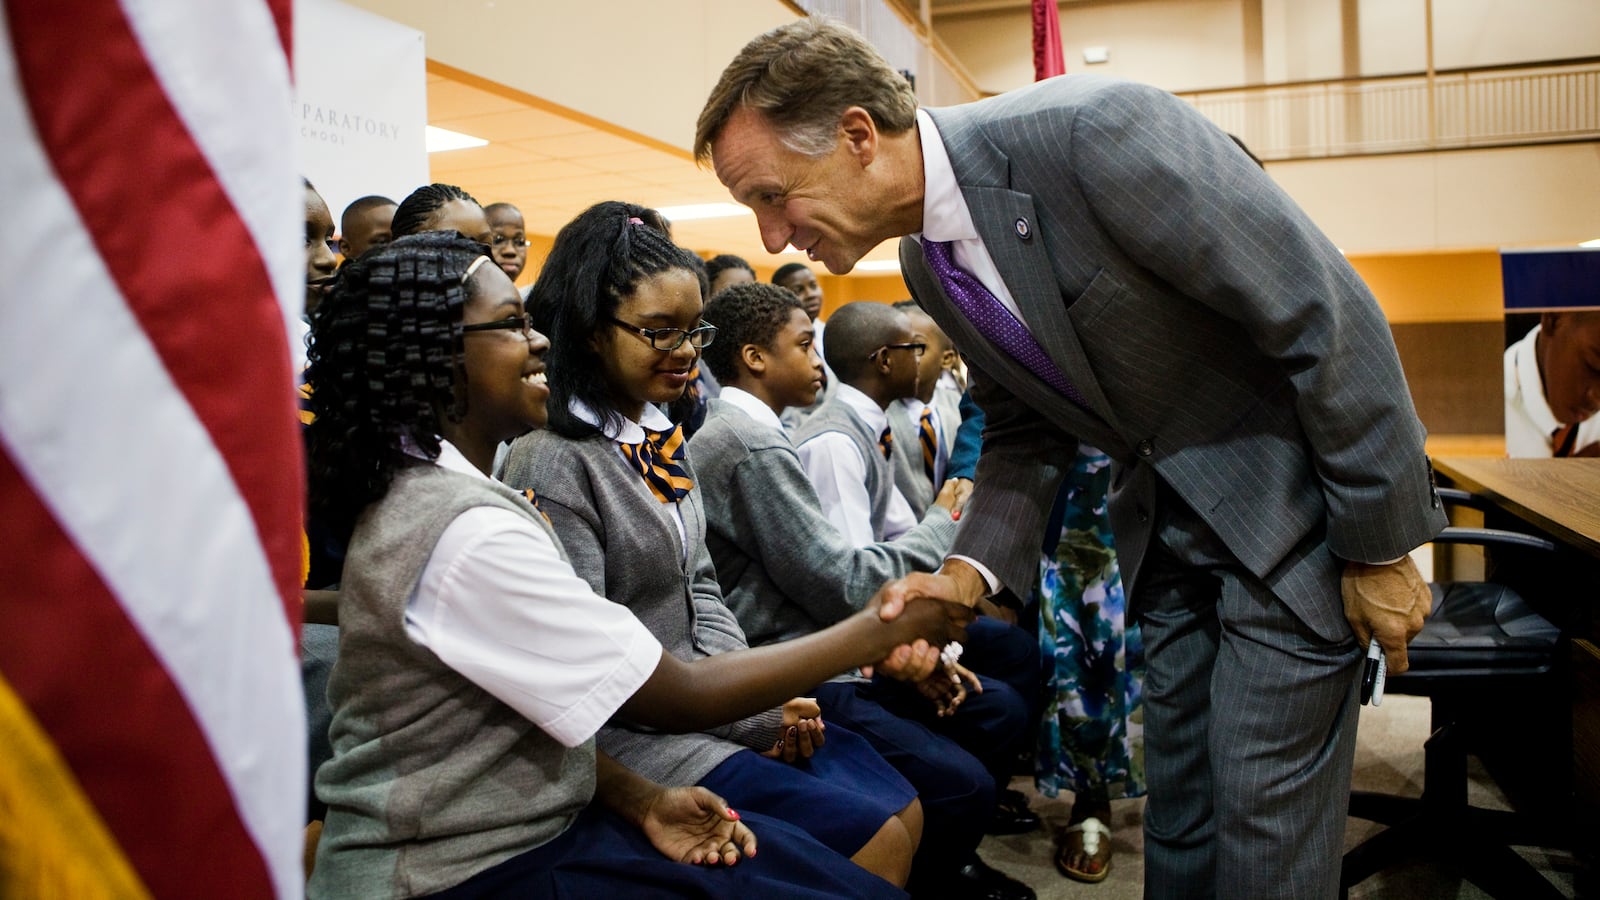 Gov. Bill Haslam greets a student at a Memphis charter school in 2011. (Photo by Kyle Kurlick/Memphis Daily News)